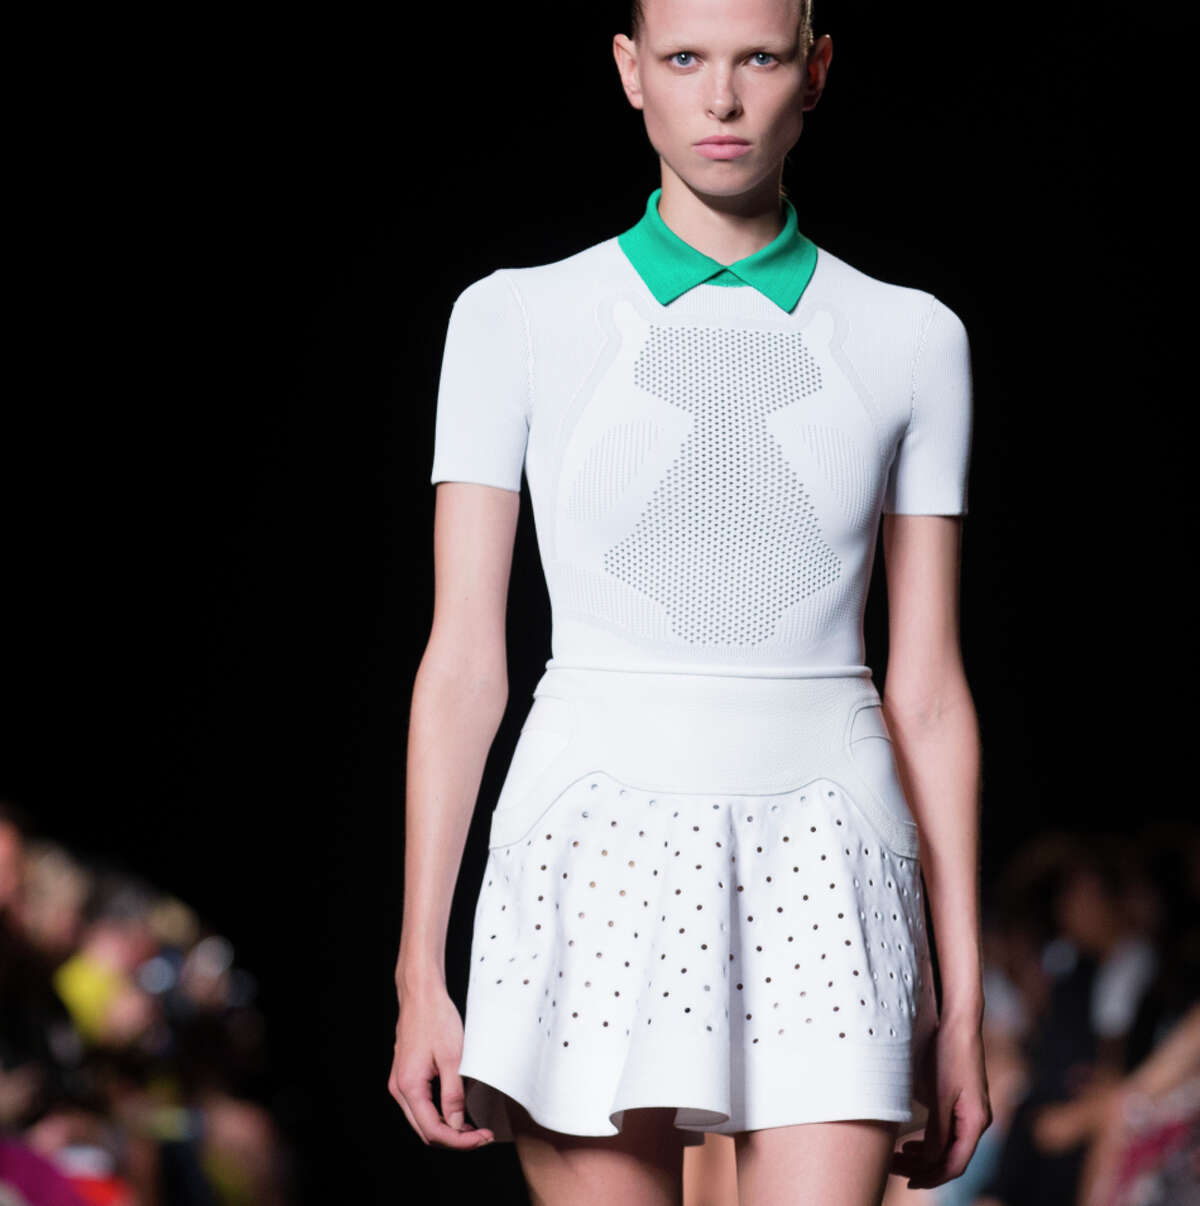 Athletic influences once again dominated Alexander Wang’s spring 2015 collection modeled during Fashion Week in New York.